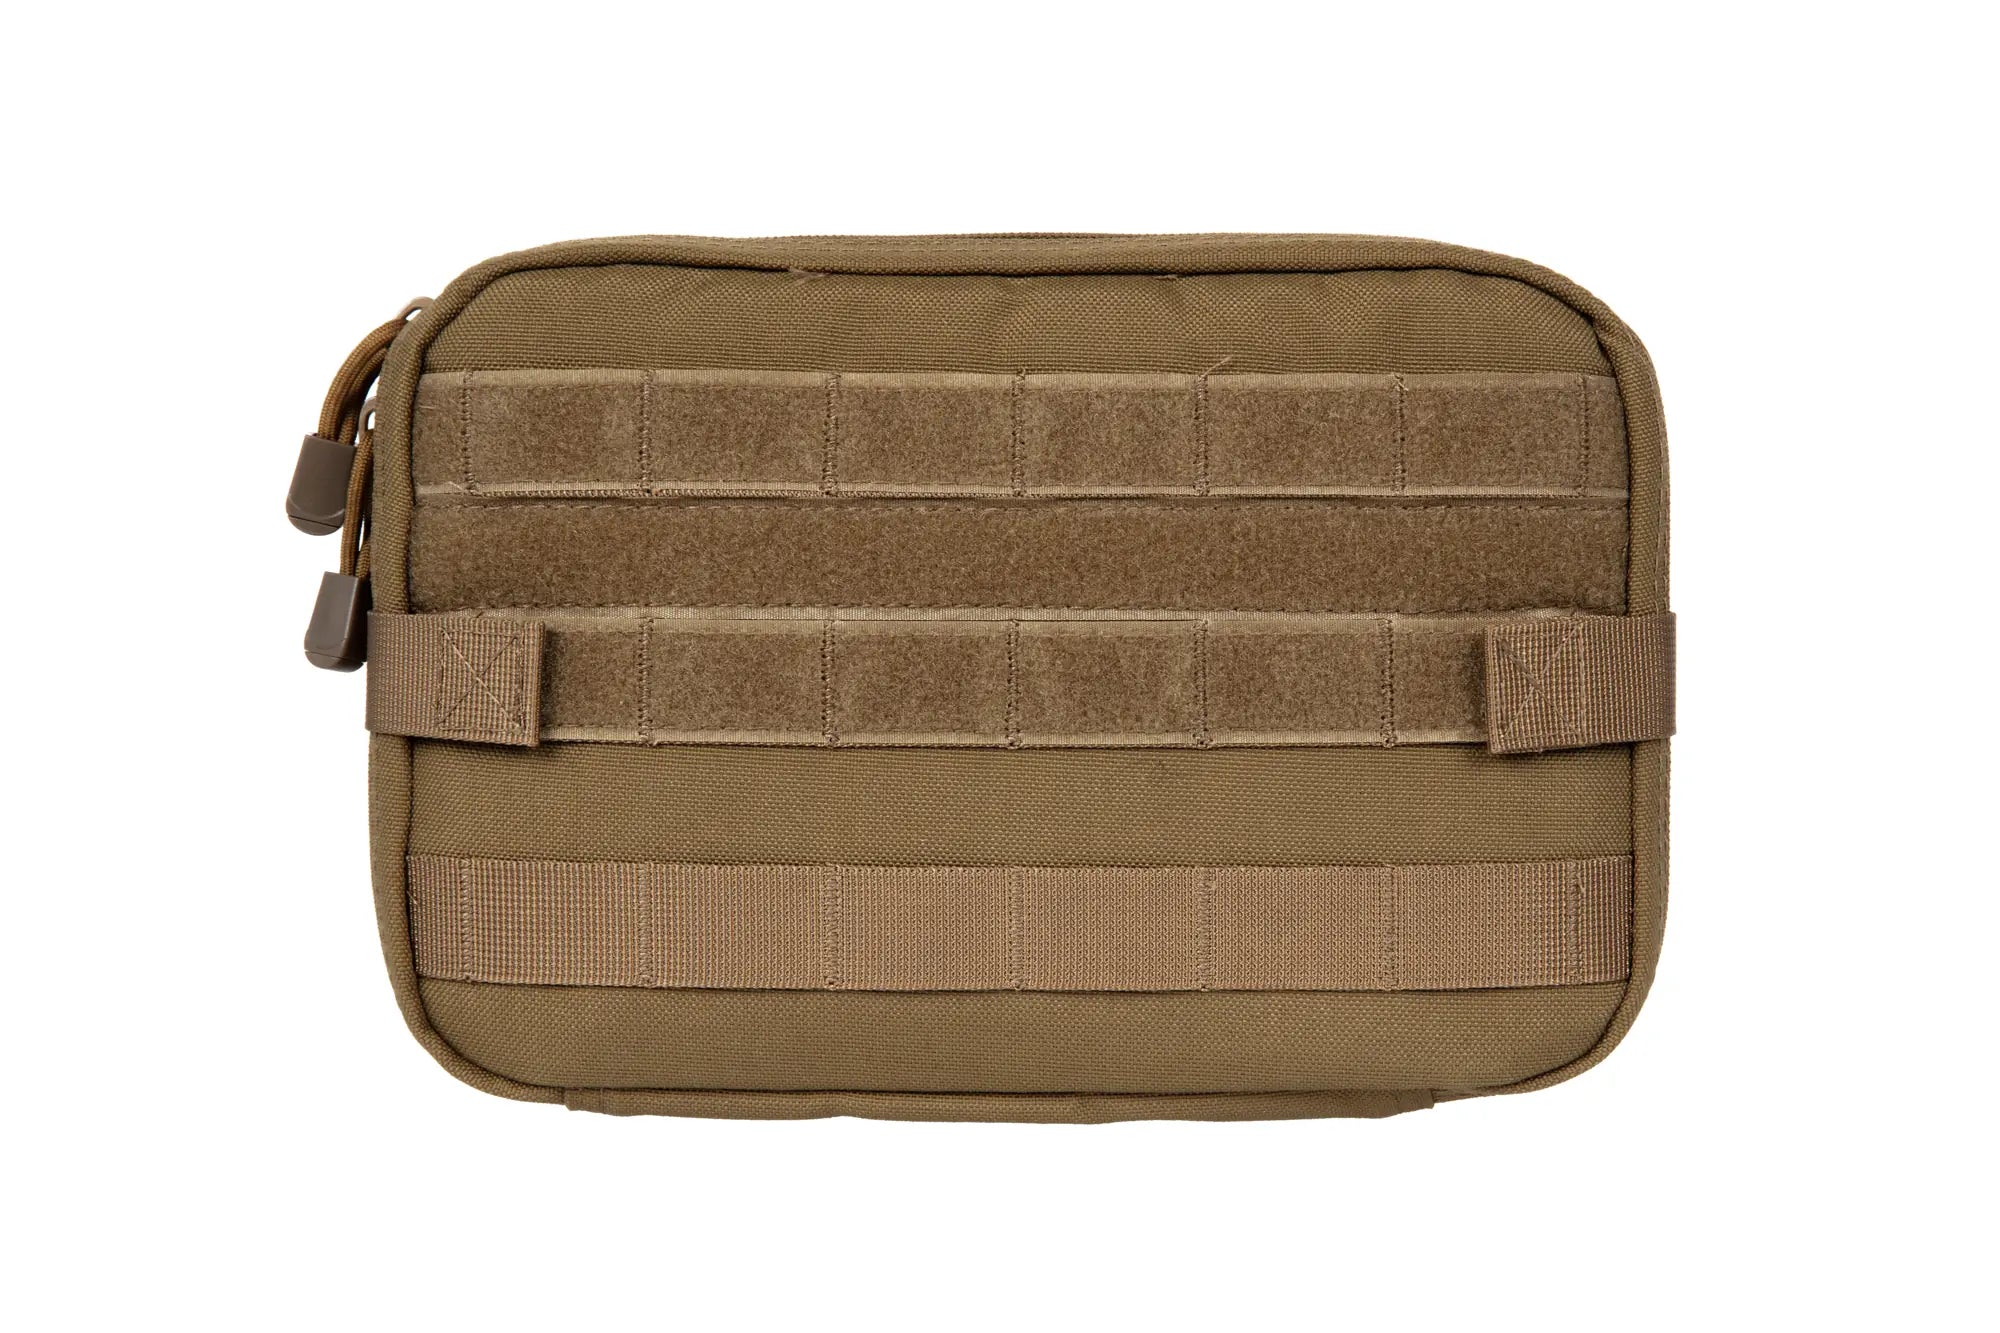 Large Administration Pouch with a Map Holder - Tan-1